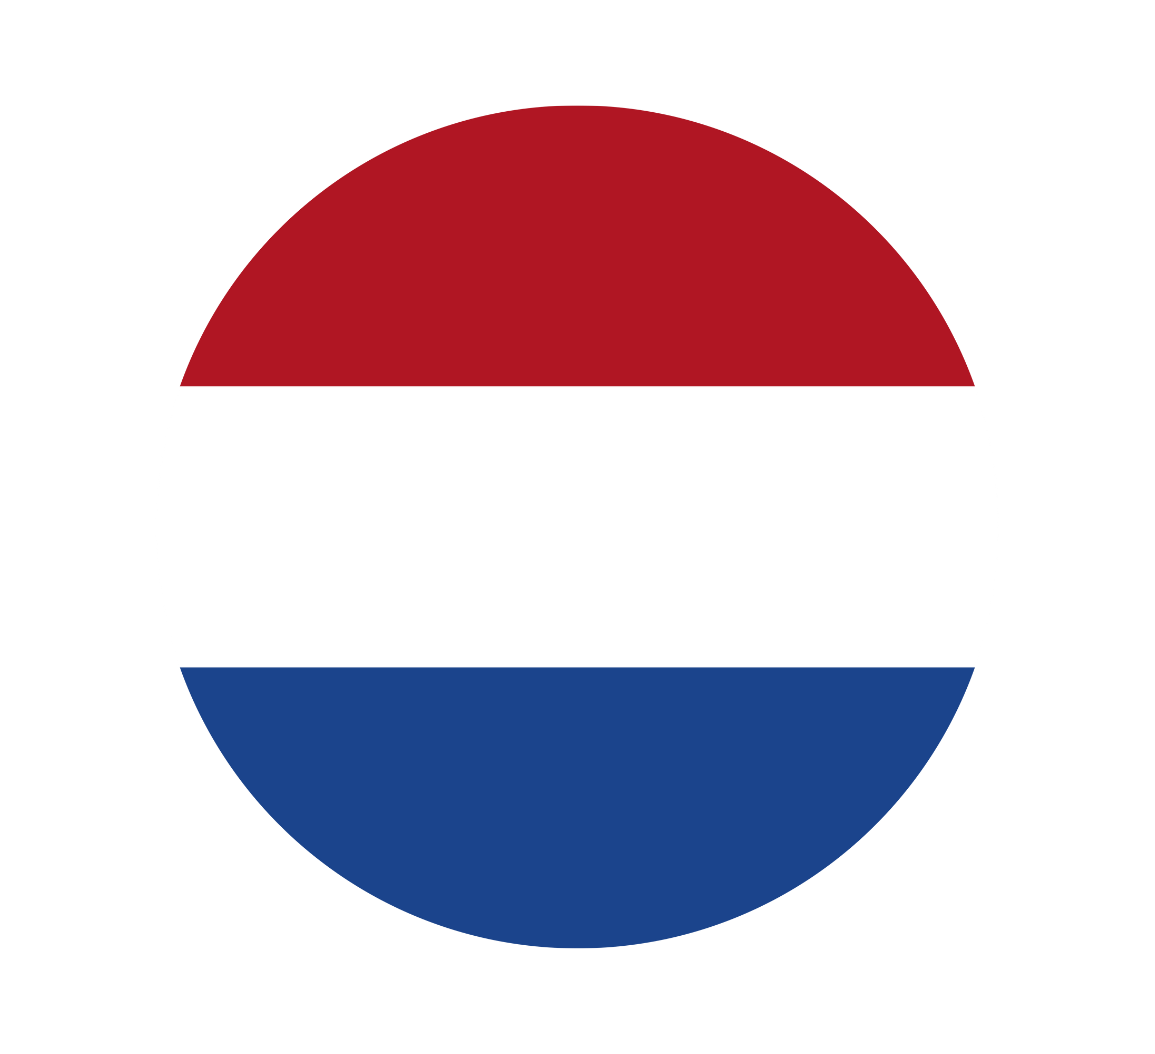 The Netherlands flag in a circle